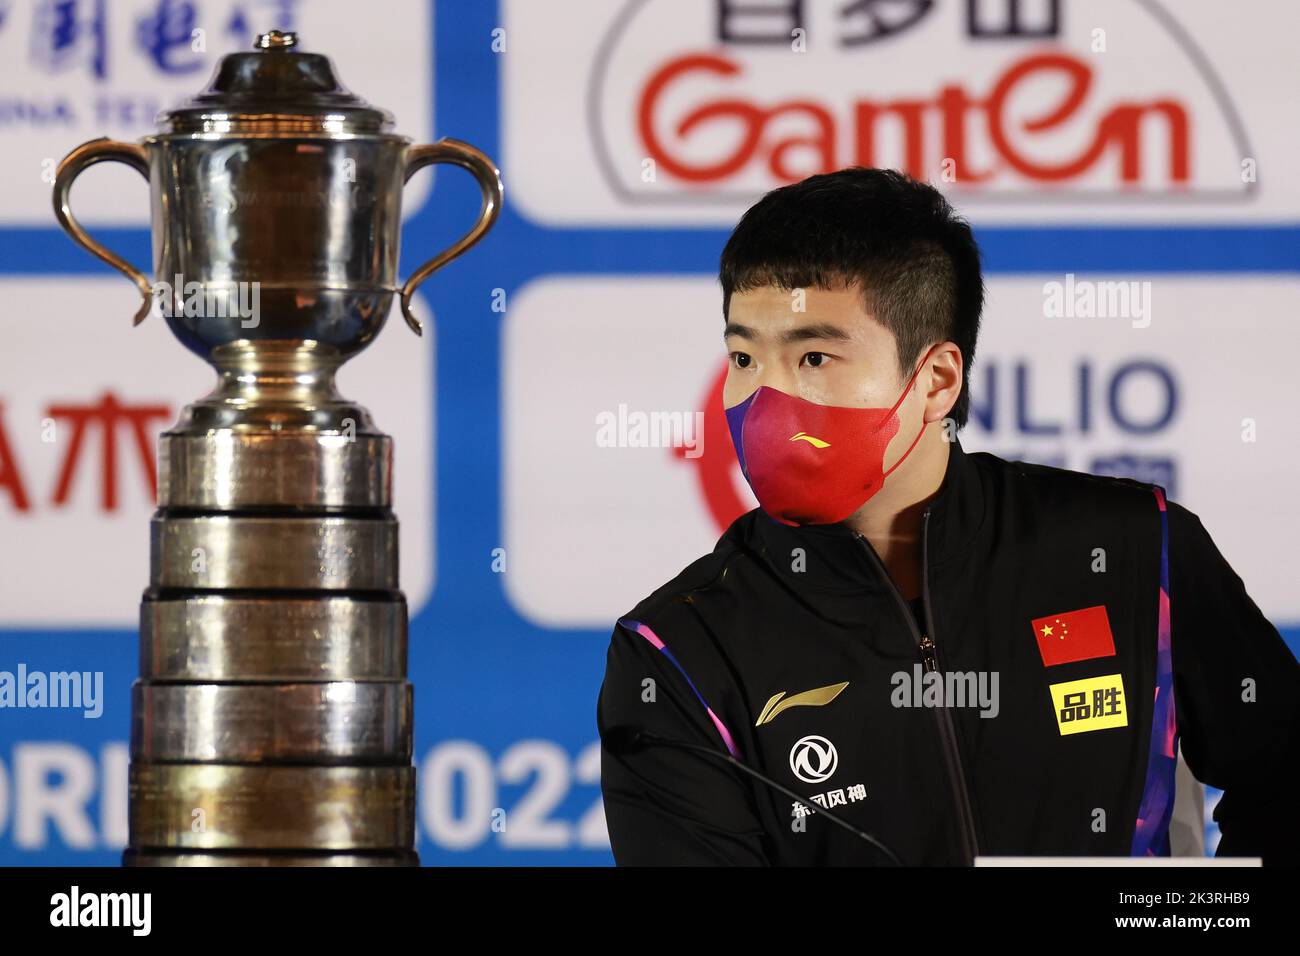 Chengdu, China's Sichuan Province. 28th Sep, 2022. Liang Jingkun of China is seen during the draw ceremony of the 2022 ITTF World Team Table Tennis Championships Finals in Chengdu, southwest China's Sichuan Province, Sept. 28, 2022. Credit: Liu Xu/Xinhua/Alamy Live News Stock Photo